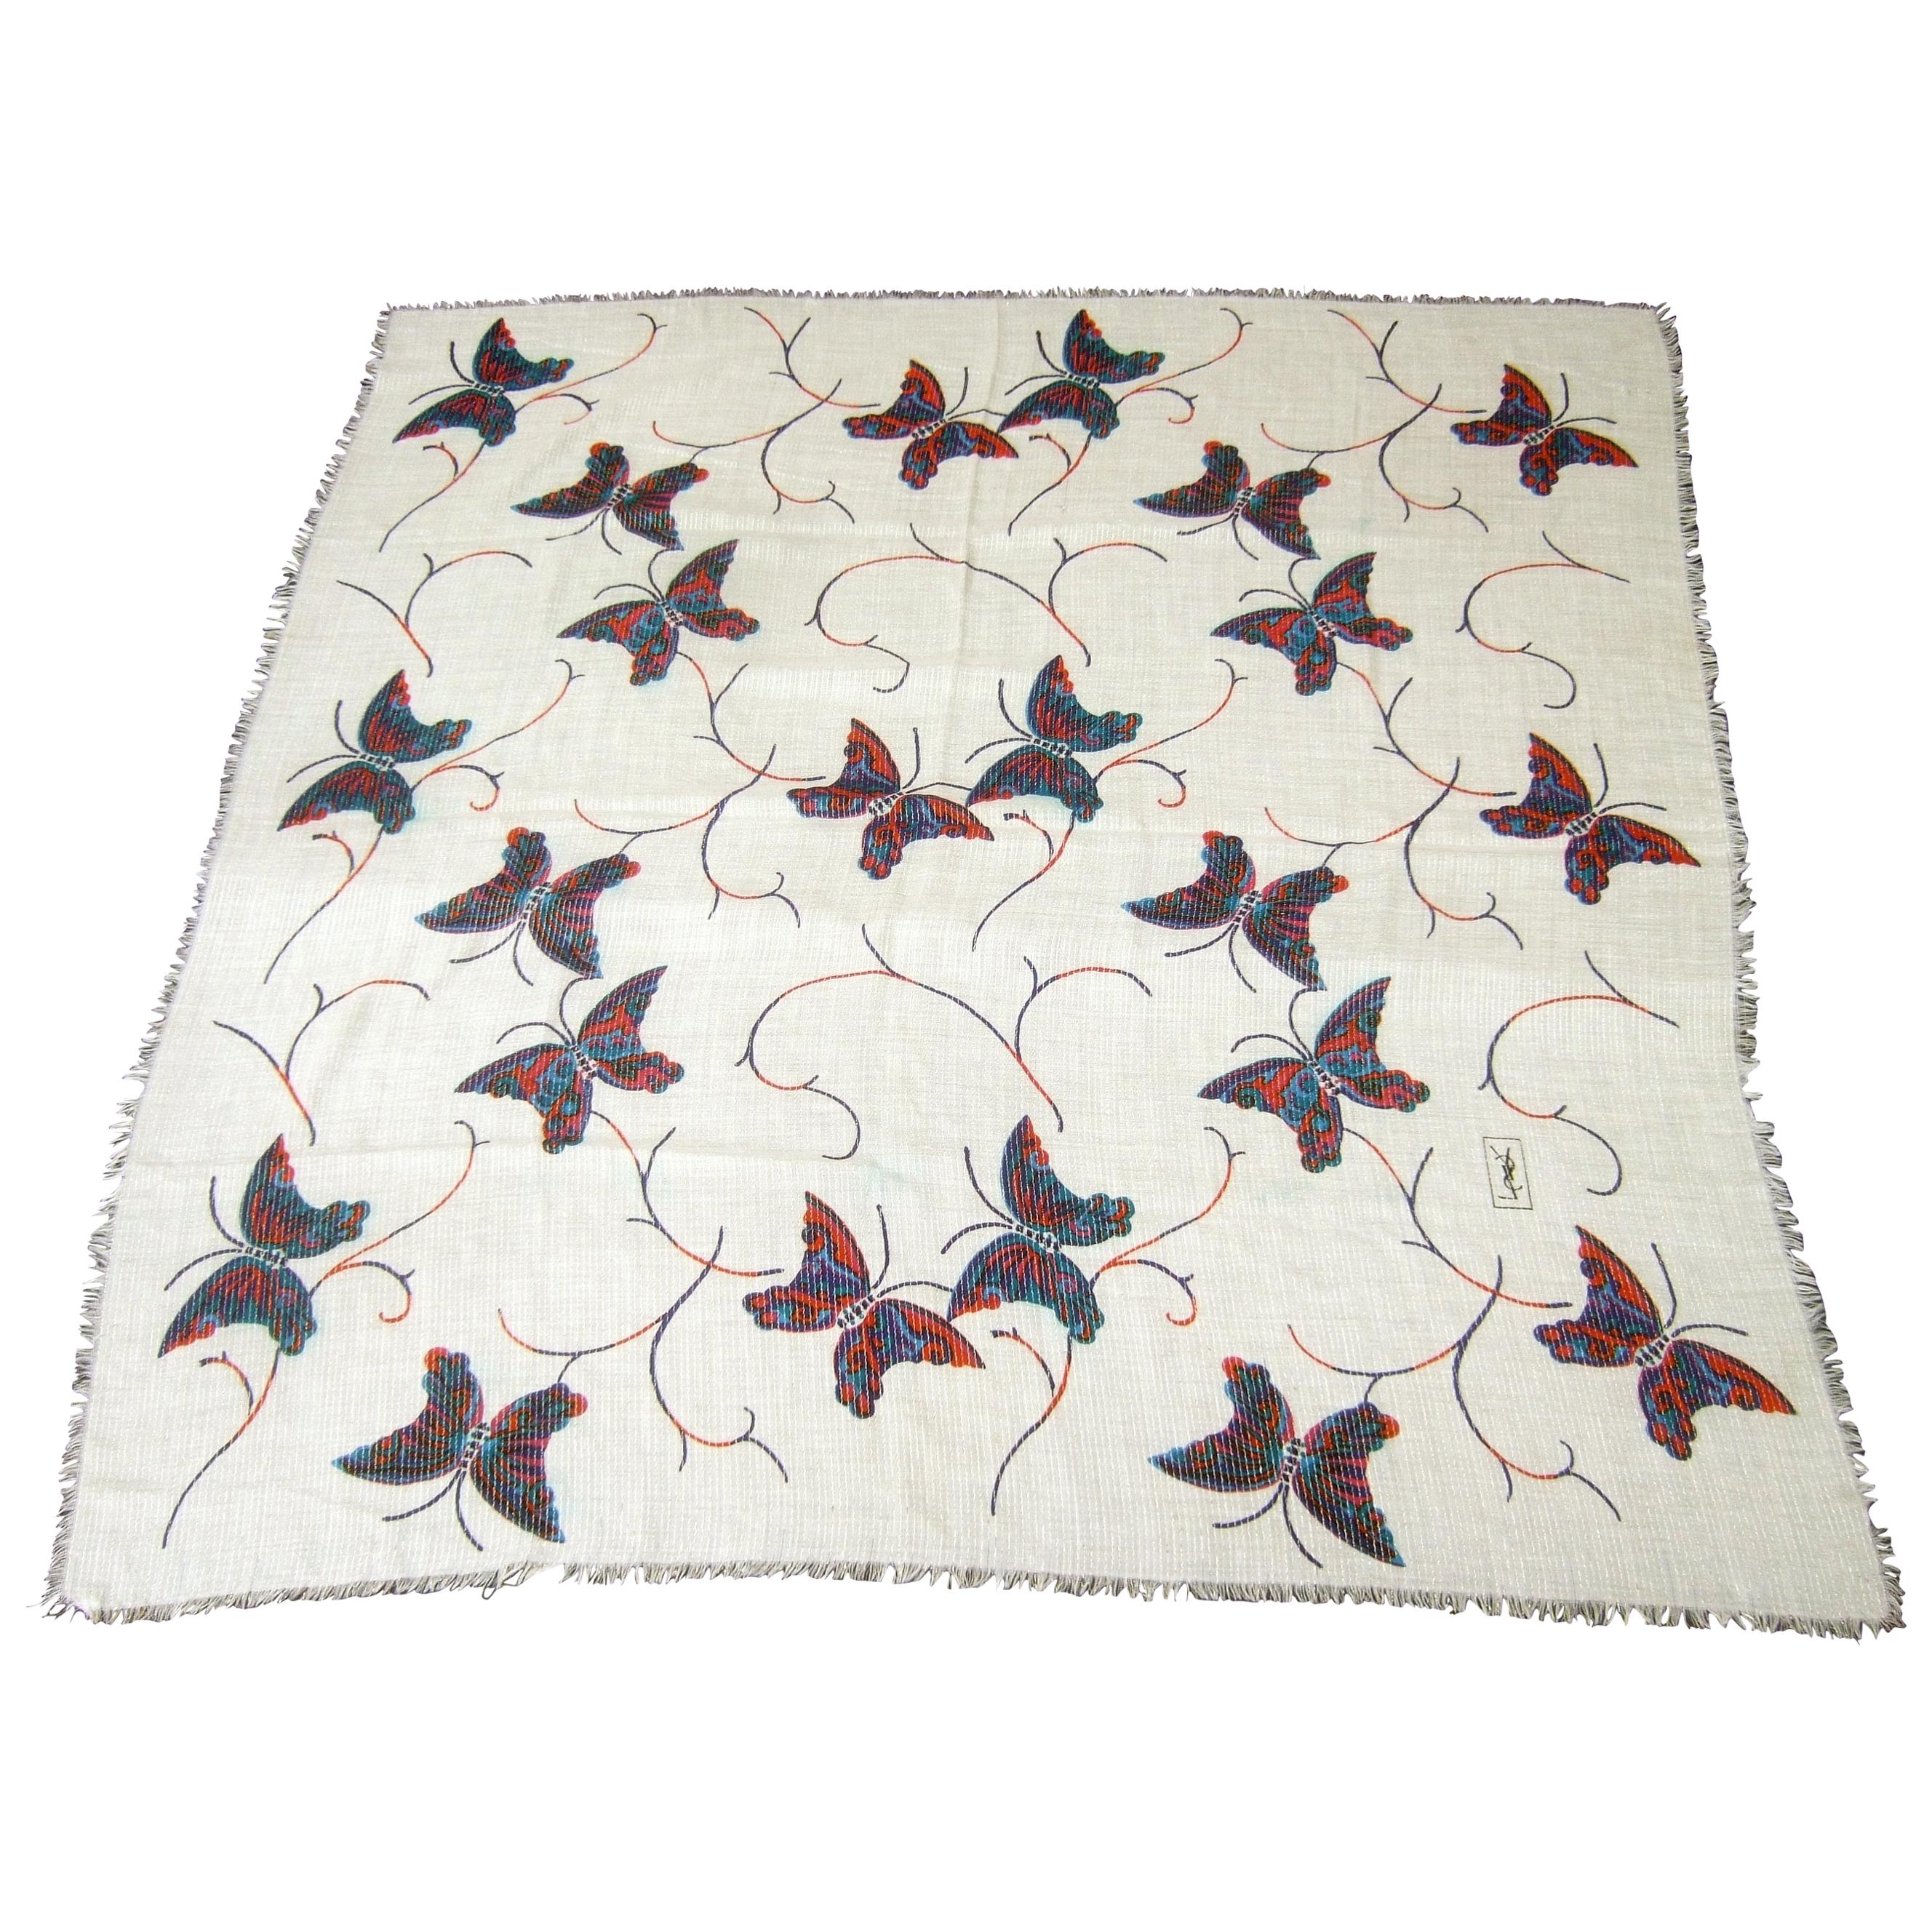 Yves Saint Laurent Large Butterfly Print Scarf - Shawl Wrap 52 x 53 Circa 1970s 